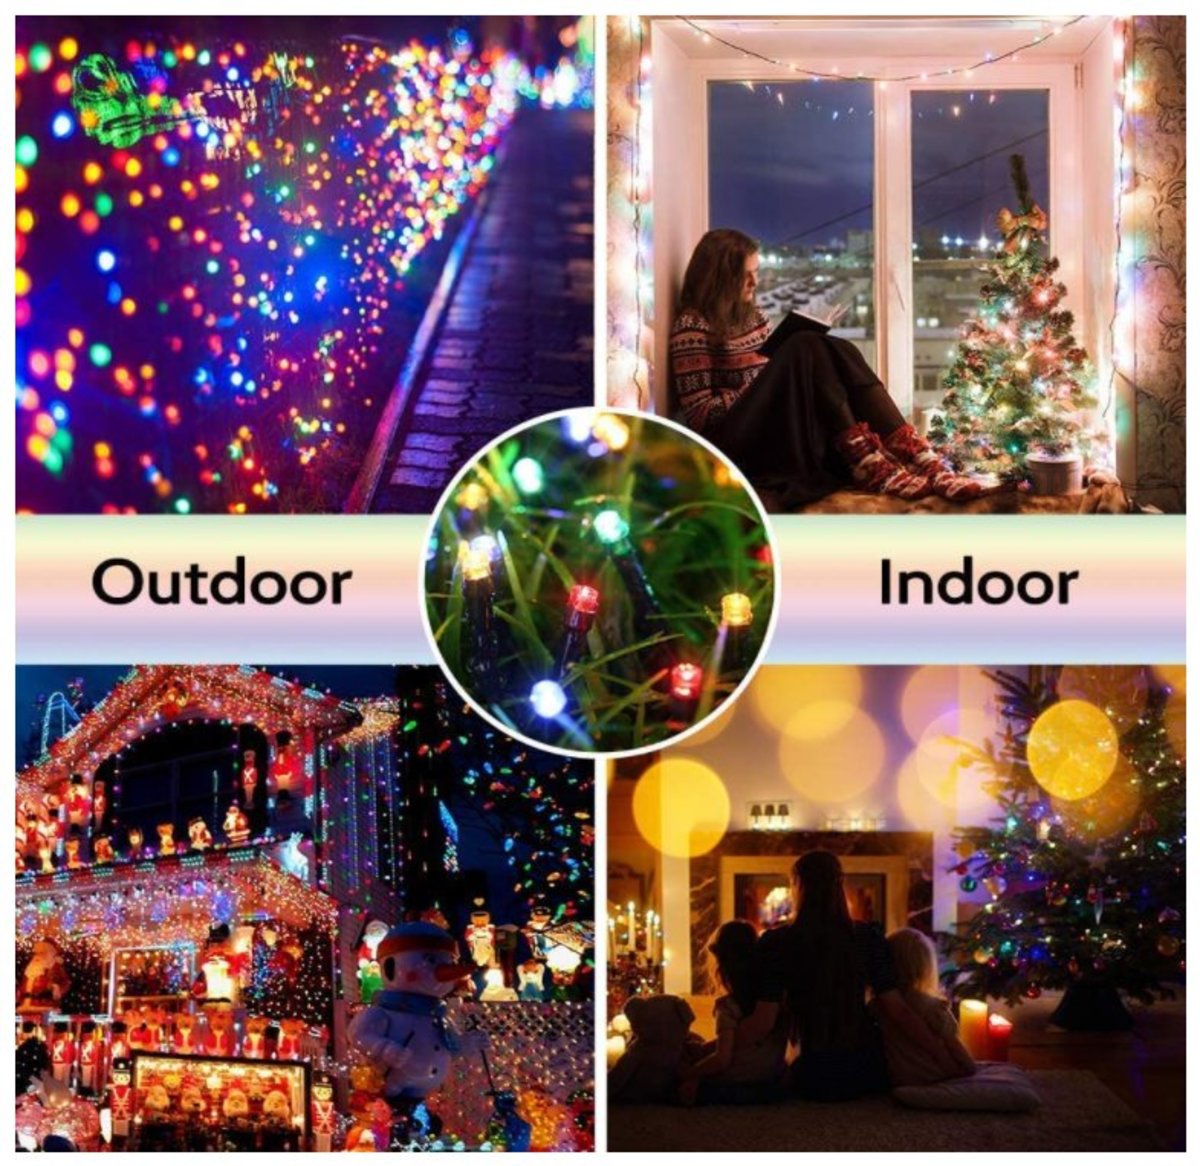 Four Color And Warm White Atmosphere Lights, 100/130/160 Led String Lights,  With Remote Control And Timing Function, Usb 8 Function Power Supply, For  Indoor Outdoor Christmas Tree Parties, Weddings, Christmas Decorations,  Fairy